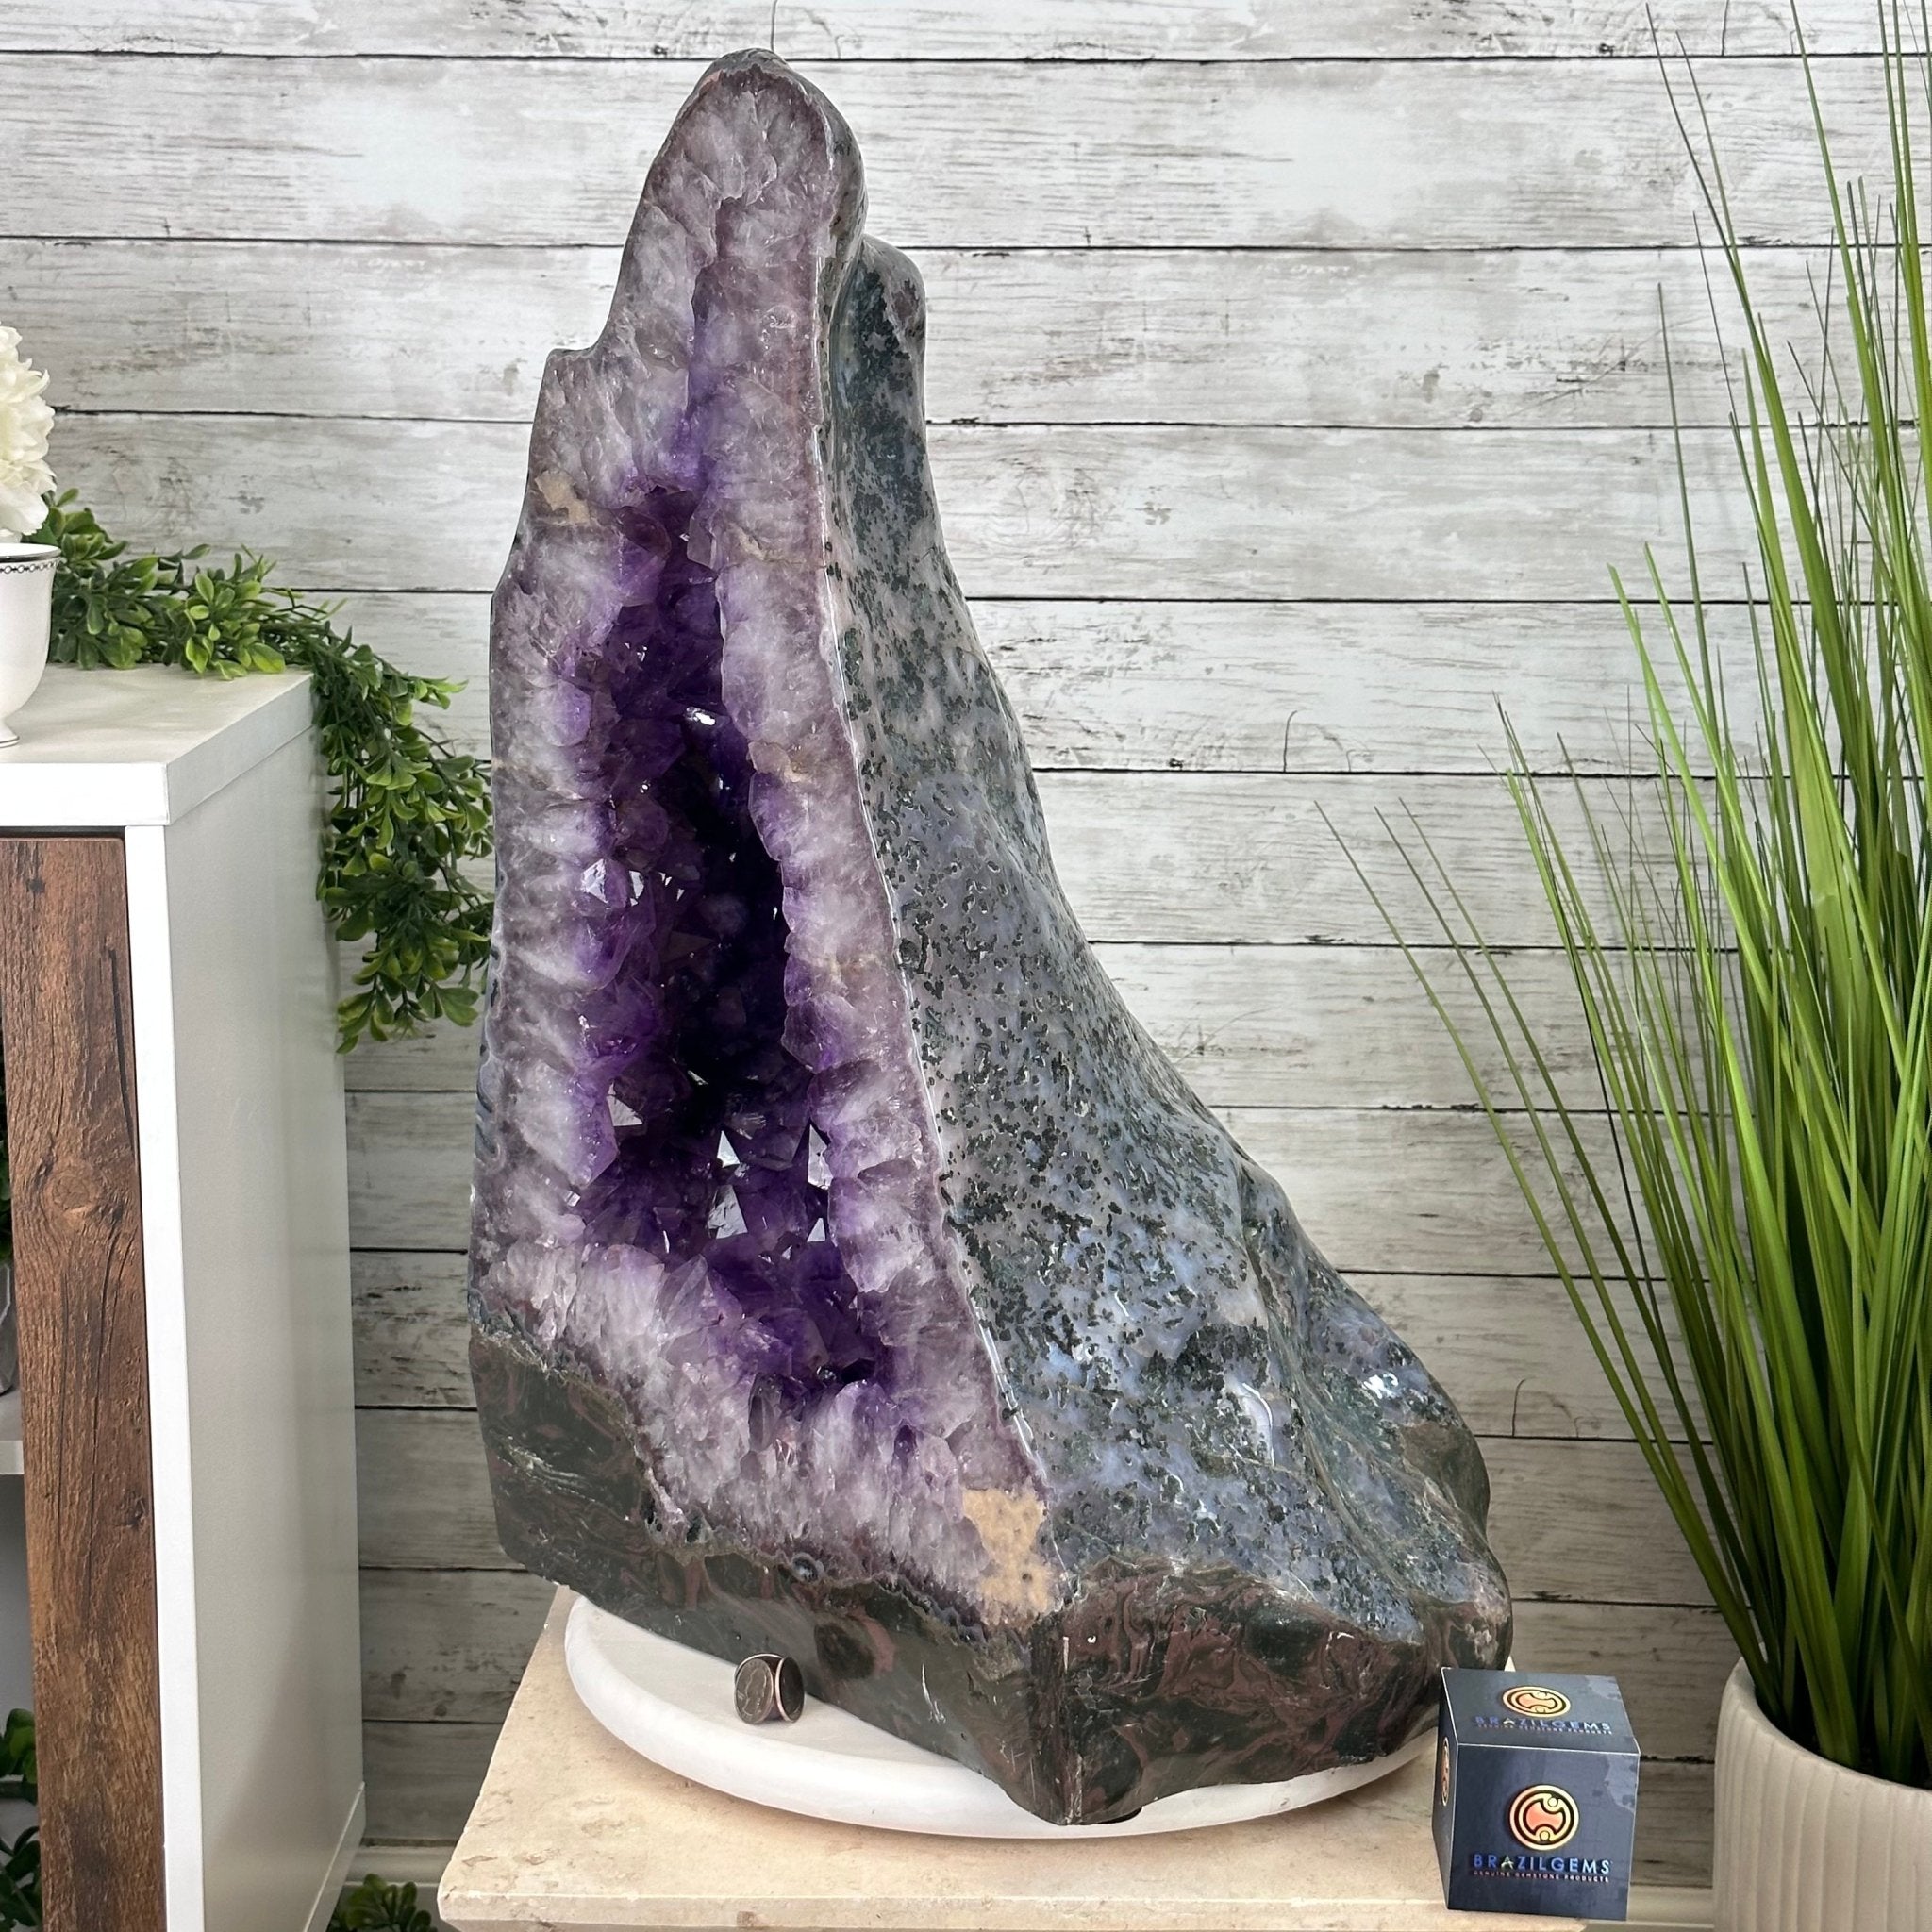 Super Quality Polished Brazilian Amethyst Cathedral, 140.1 lbs & 24.6" tall Model #5602-0201 by Brazil Gems - Brazil GemsBrazil GemsSuper Quality Polished Brazilian Amethyst Cathedral, 140.1 lbs & 24.6" tall Model #5602-0201 by Brazil GemsPolished Cathedrals5602-0201